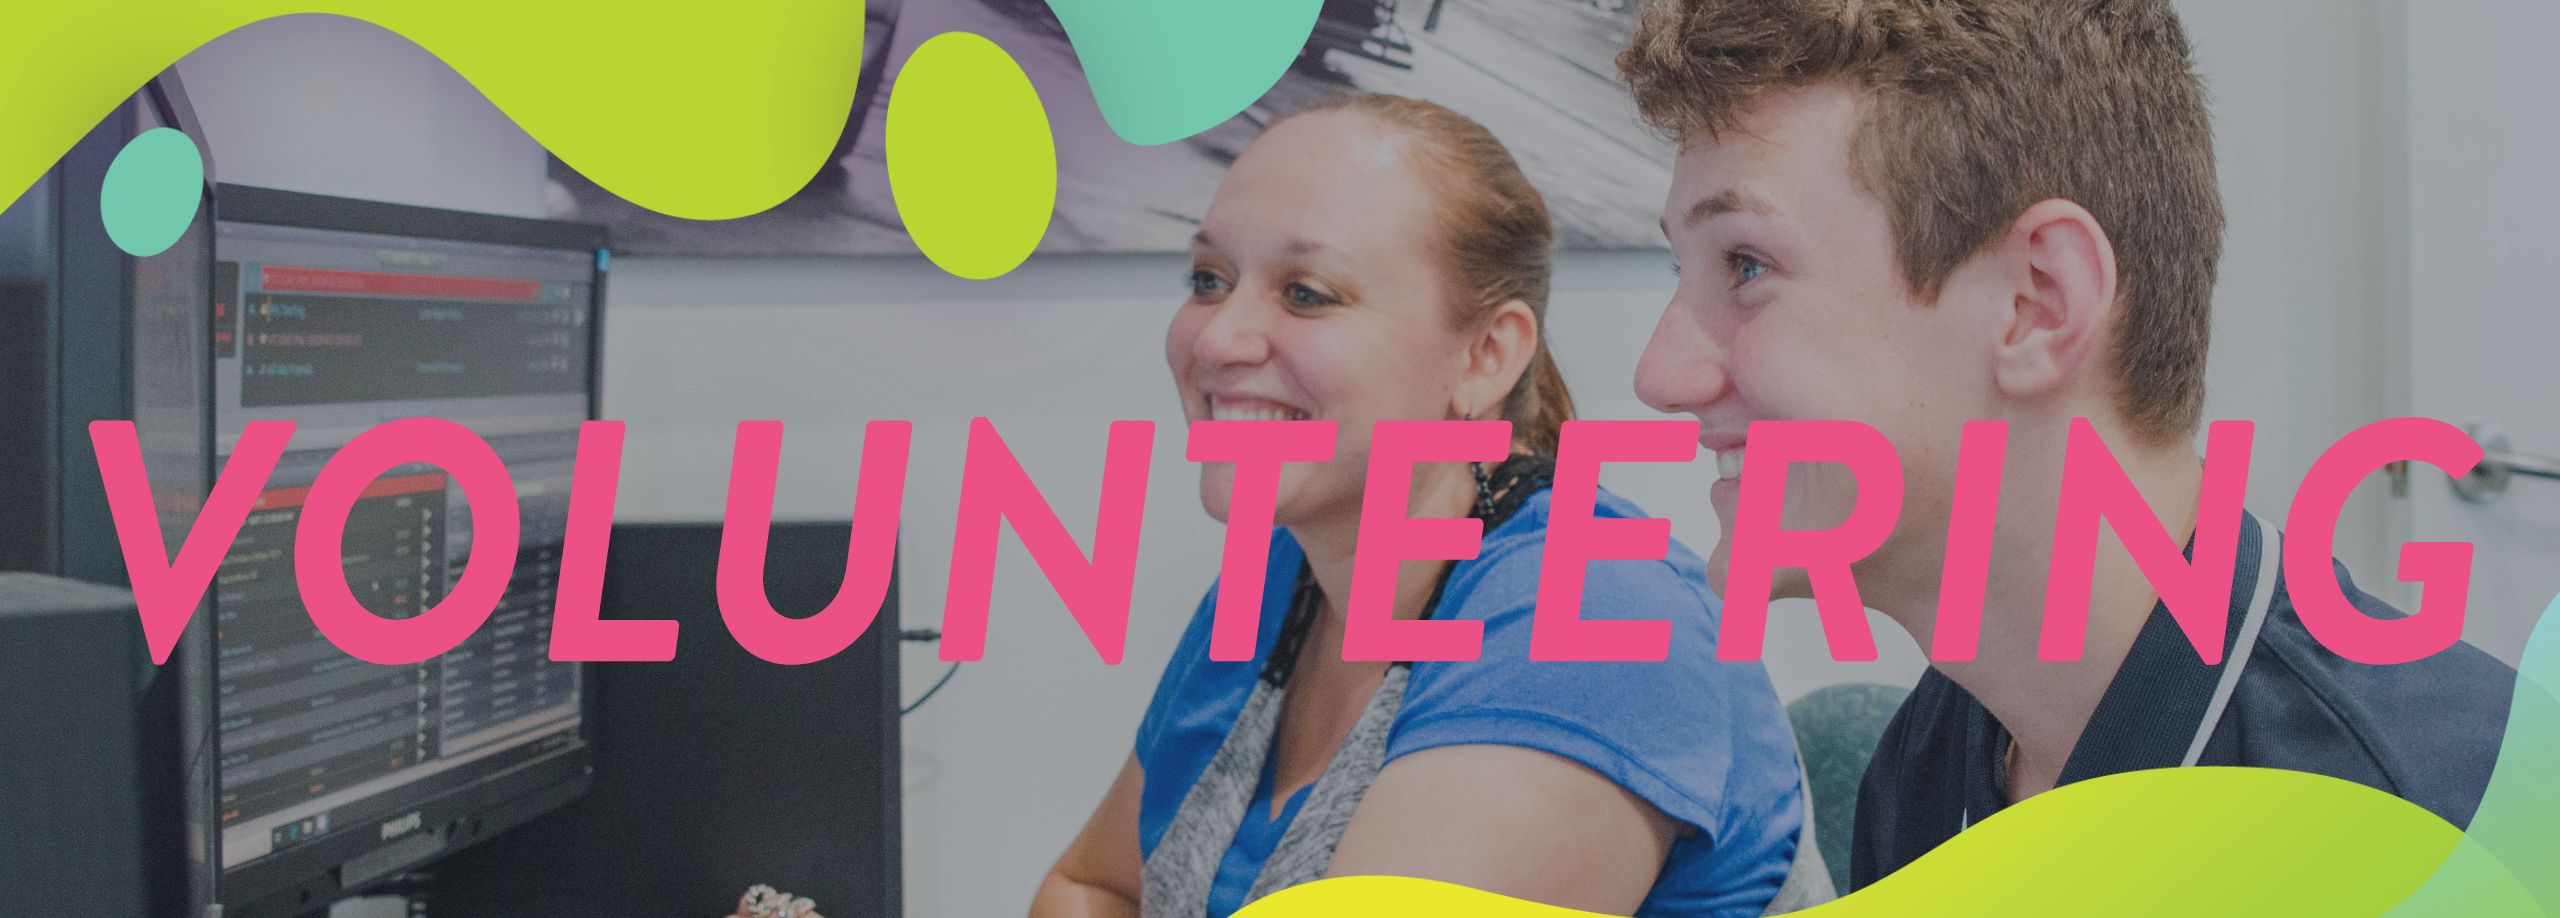 find out more about volunteering